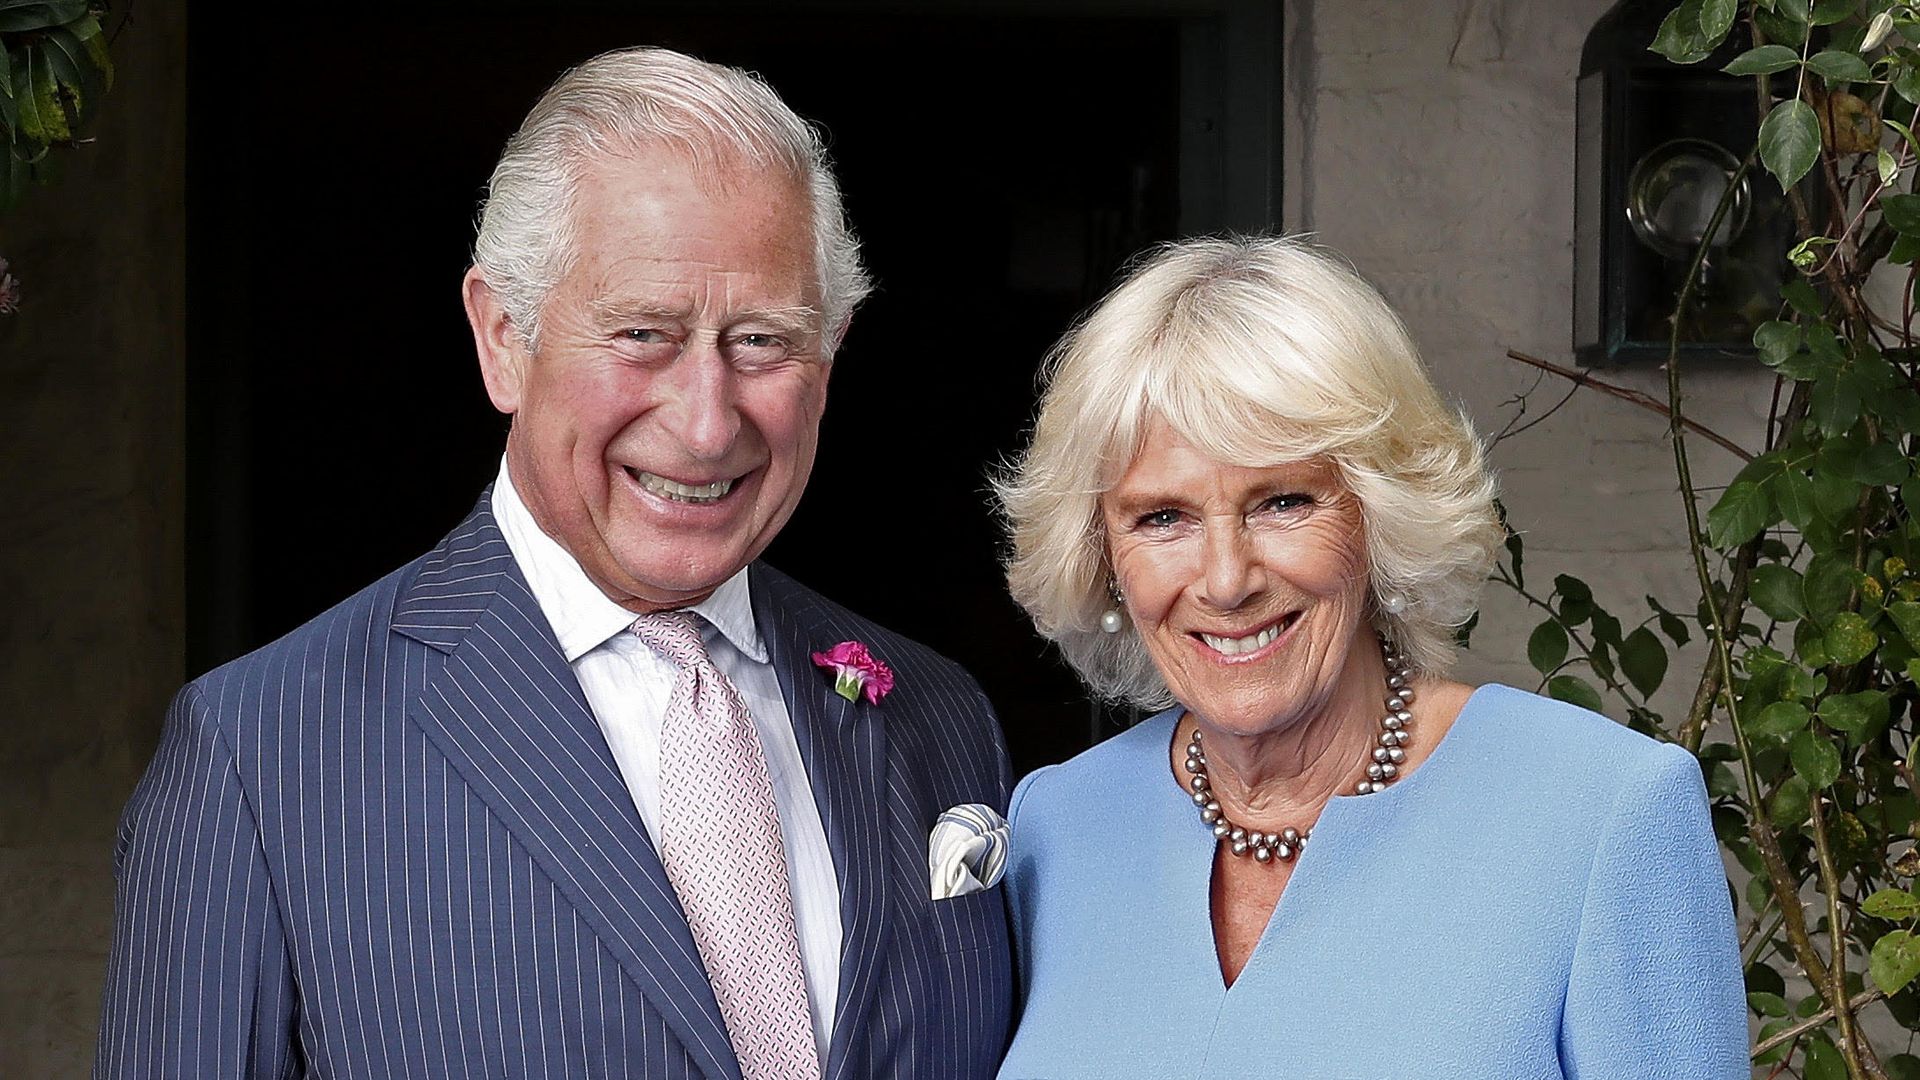 King Charles and Queen Camilla postpone engagements until after general election - details